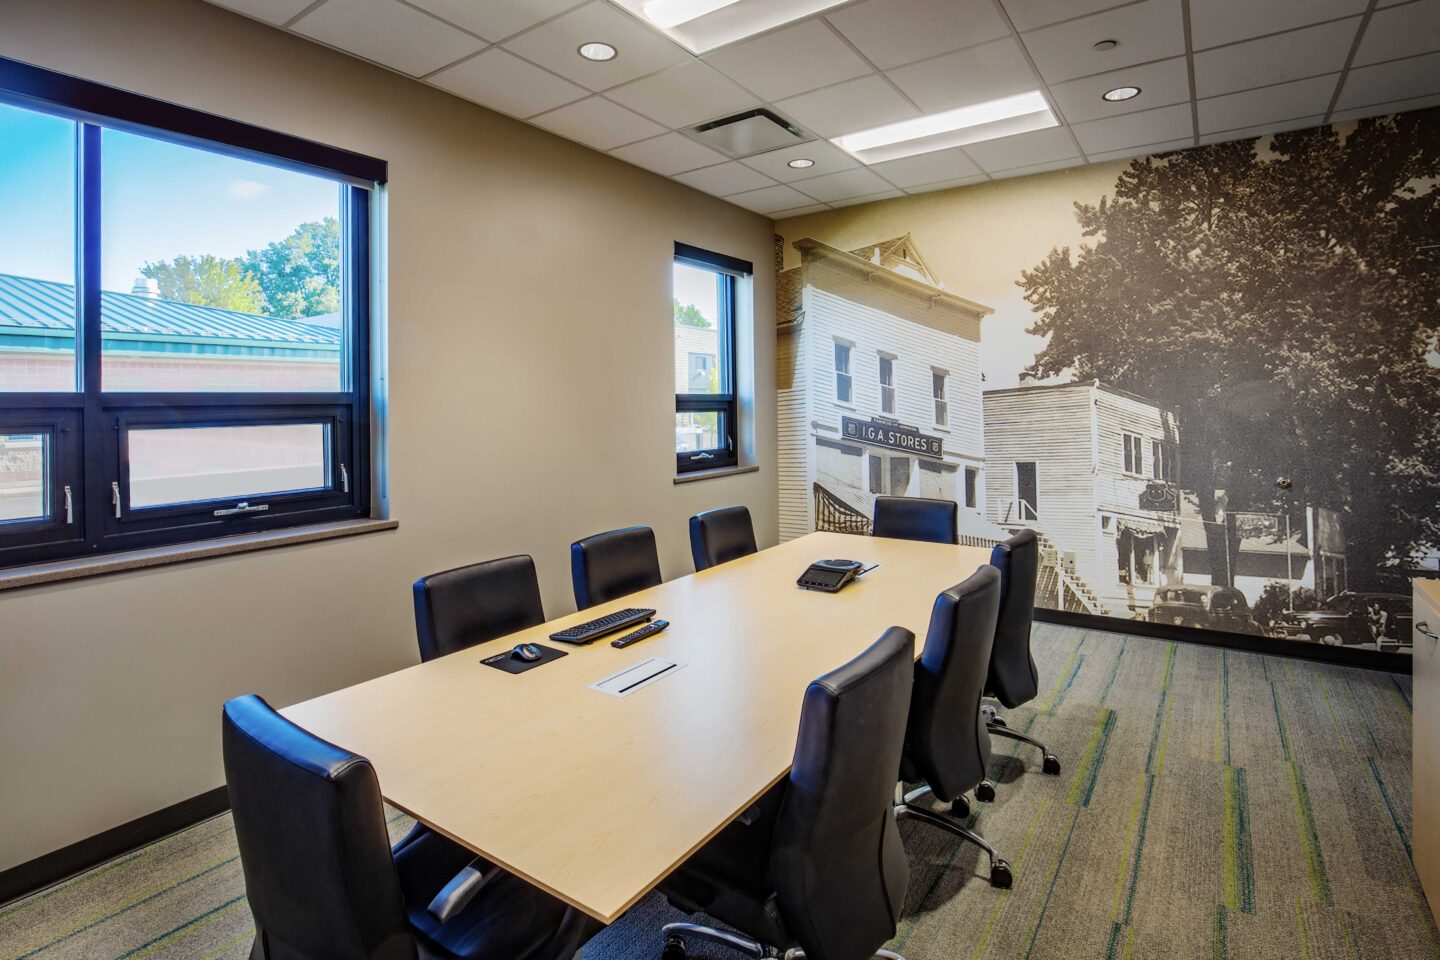 A small conference room with multiple windows features a historic photo mural of the Village of DeForest